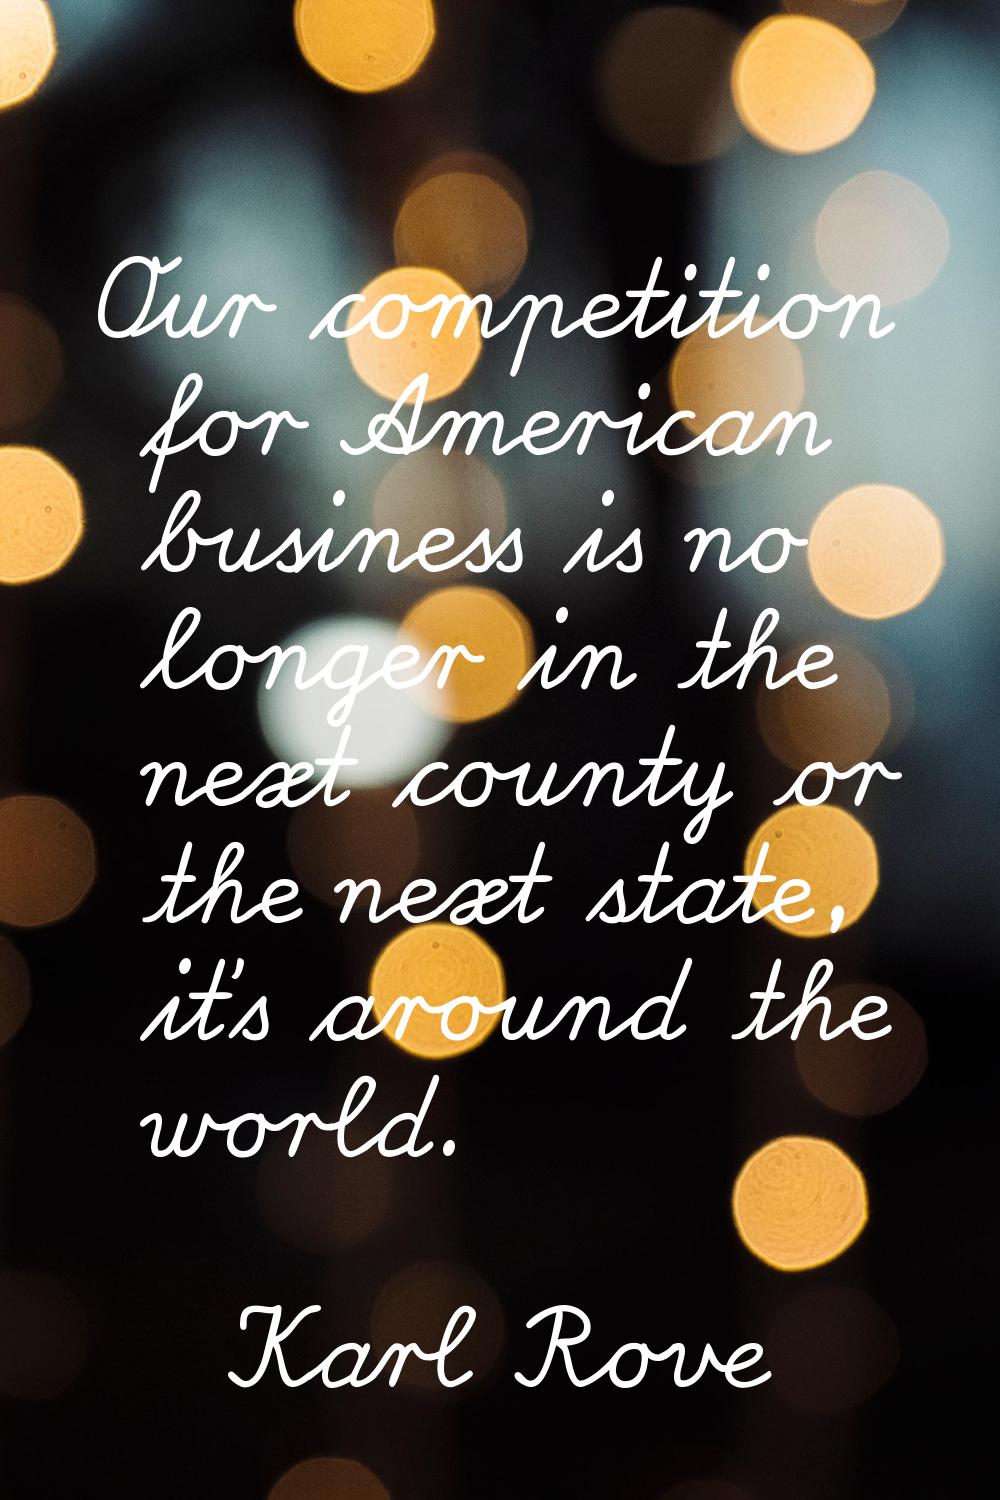 Our competition for American business is no longer in the next county or the next state, it's aroun